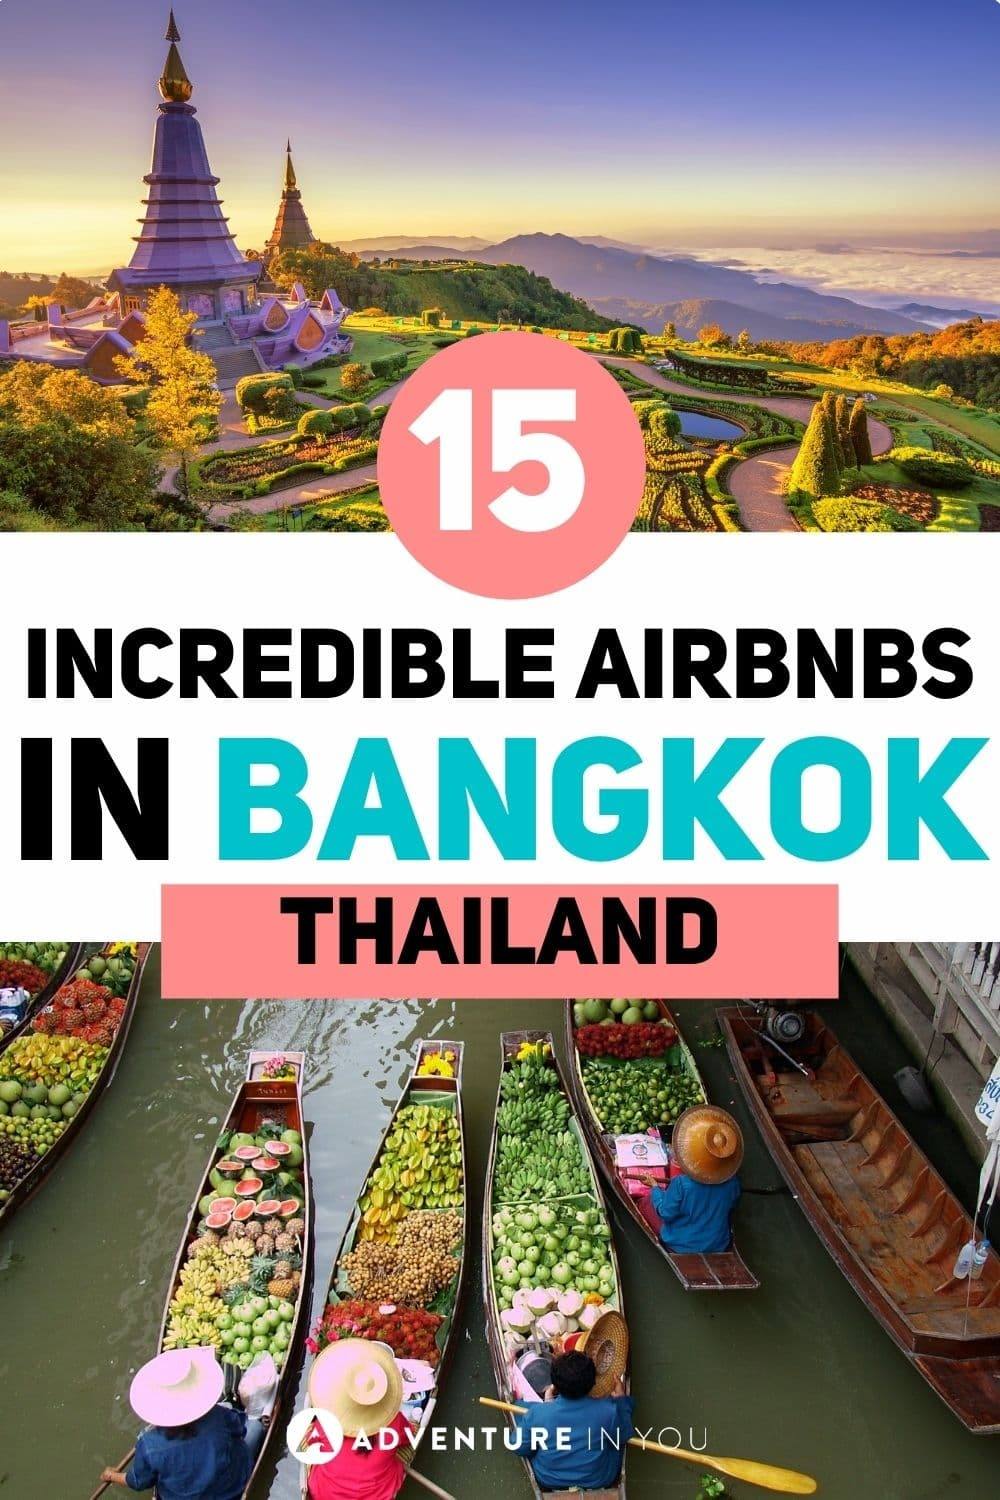 Airbnbs in Bangkok | Looking for the best Airbnbs in Bangkok Click here to see our top picks. #thailand #bangkok #wheretostayinbangkok